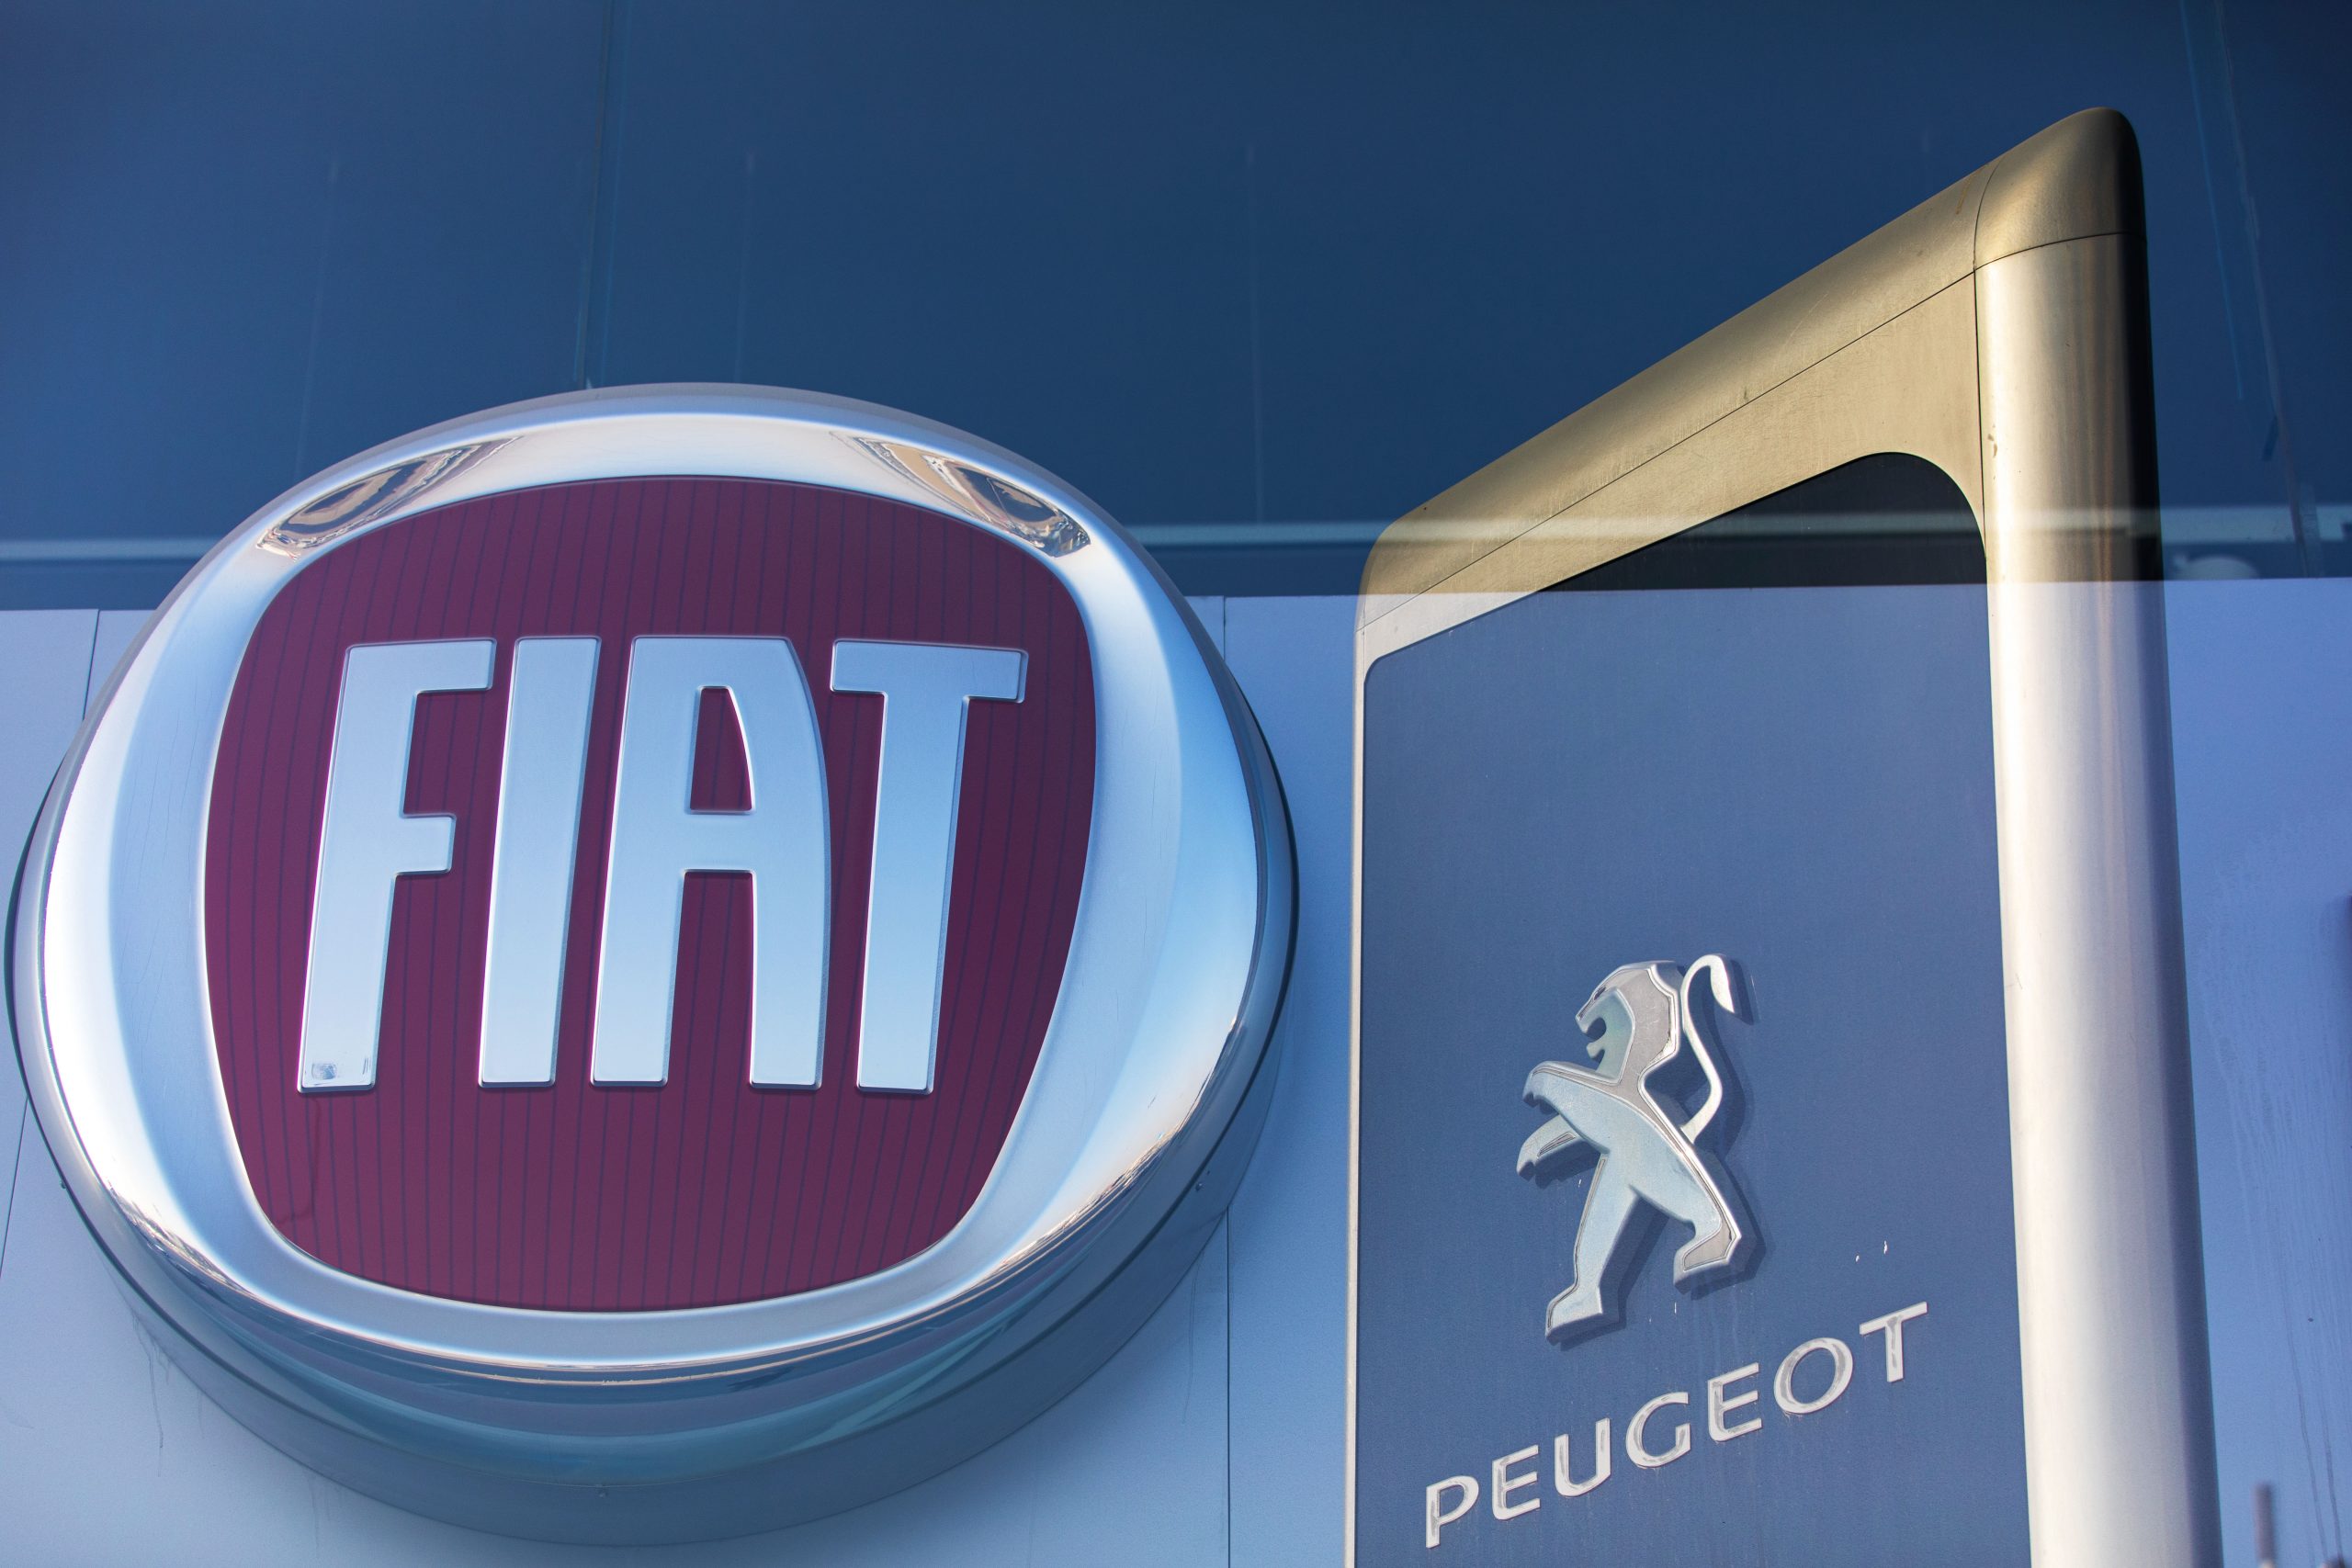 Chrysler Fiat and Peugeot French agreement for $46 billion merger, creating the fourth largest producer of cars in the world